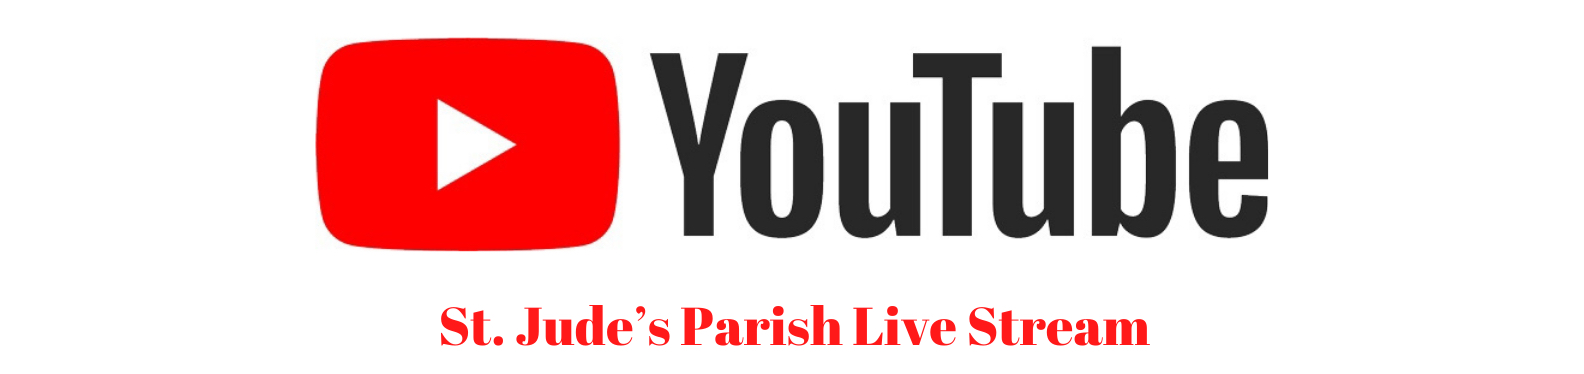 The YouTube Logo and word on white background, with the words St. Jude's Parish Live Stream written in red.